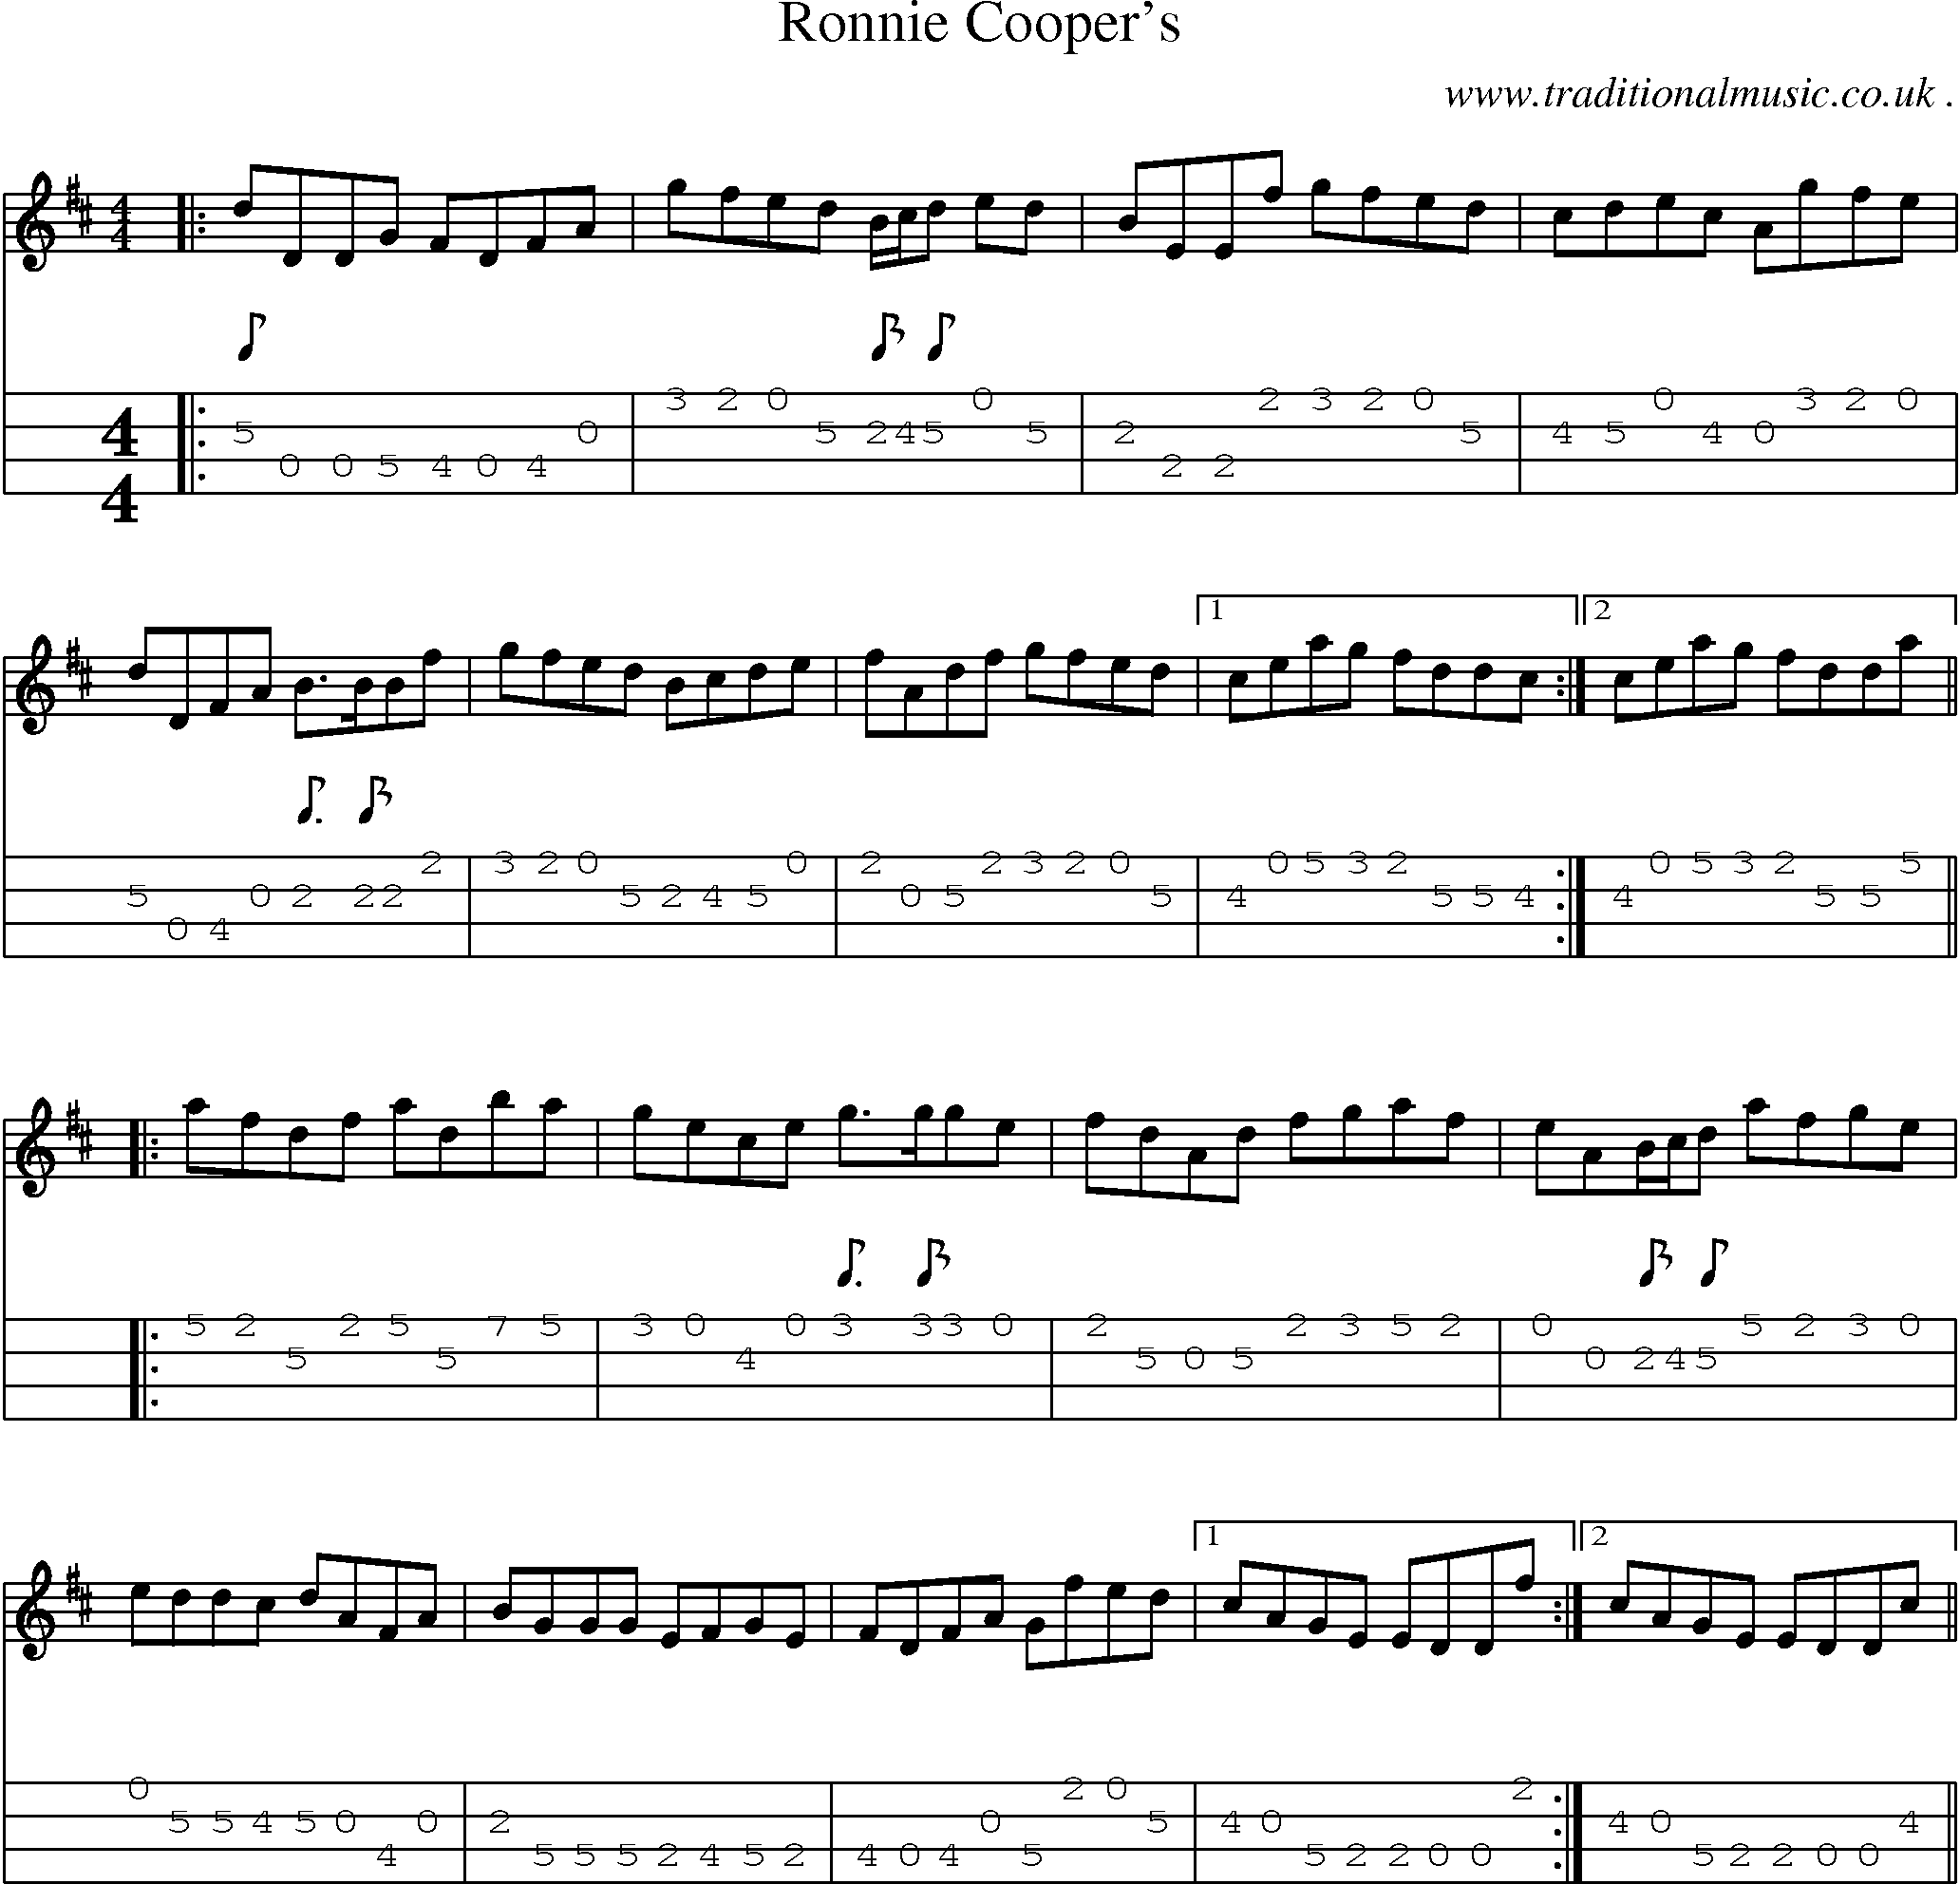 Sheet-music  score, Chords and Mandolin Tabs for Ronnie Coopers